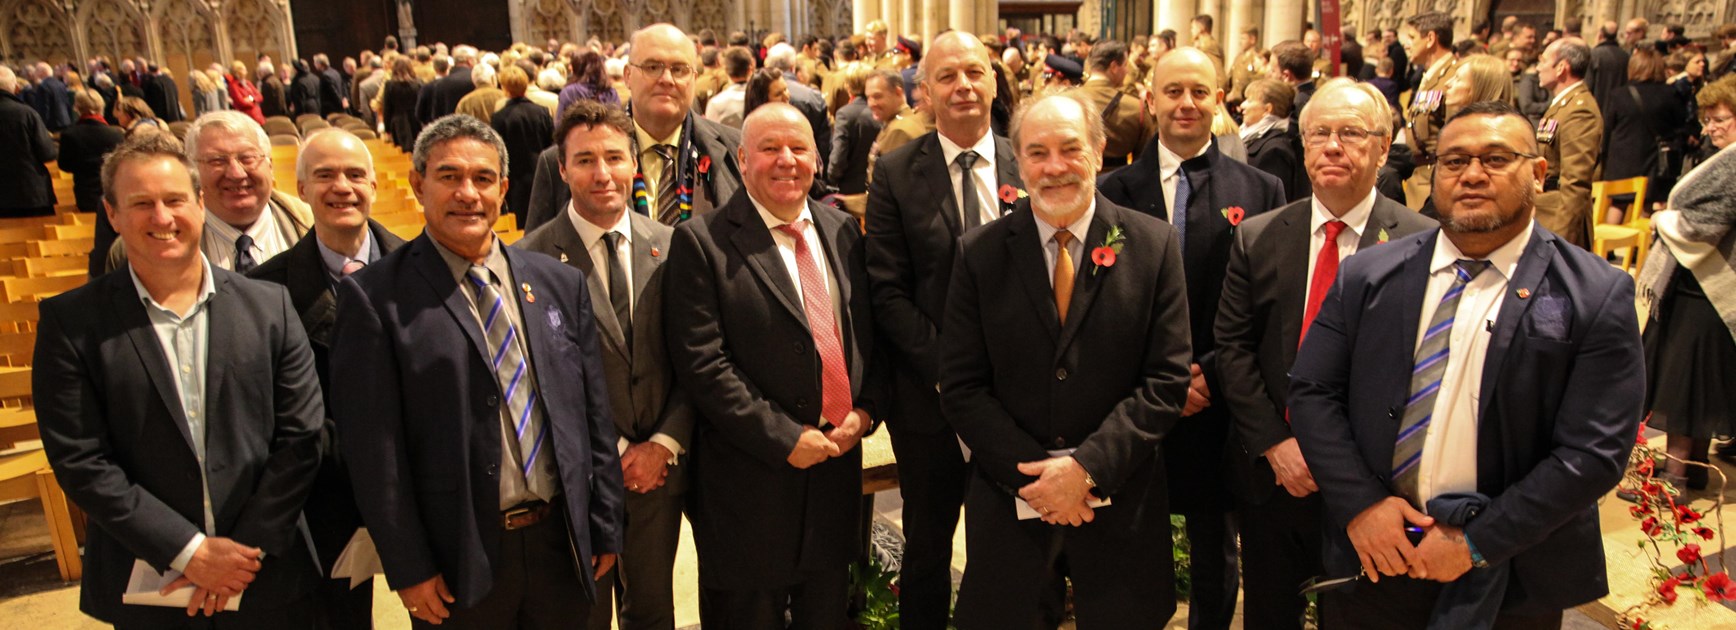 Greenberg and Beattie pay respects at UK Armistice Day service